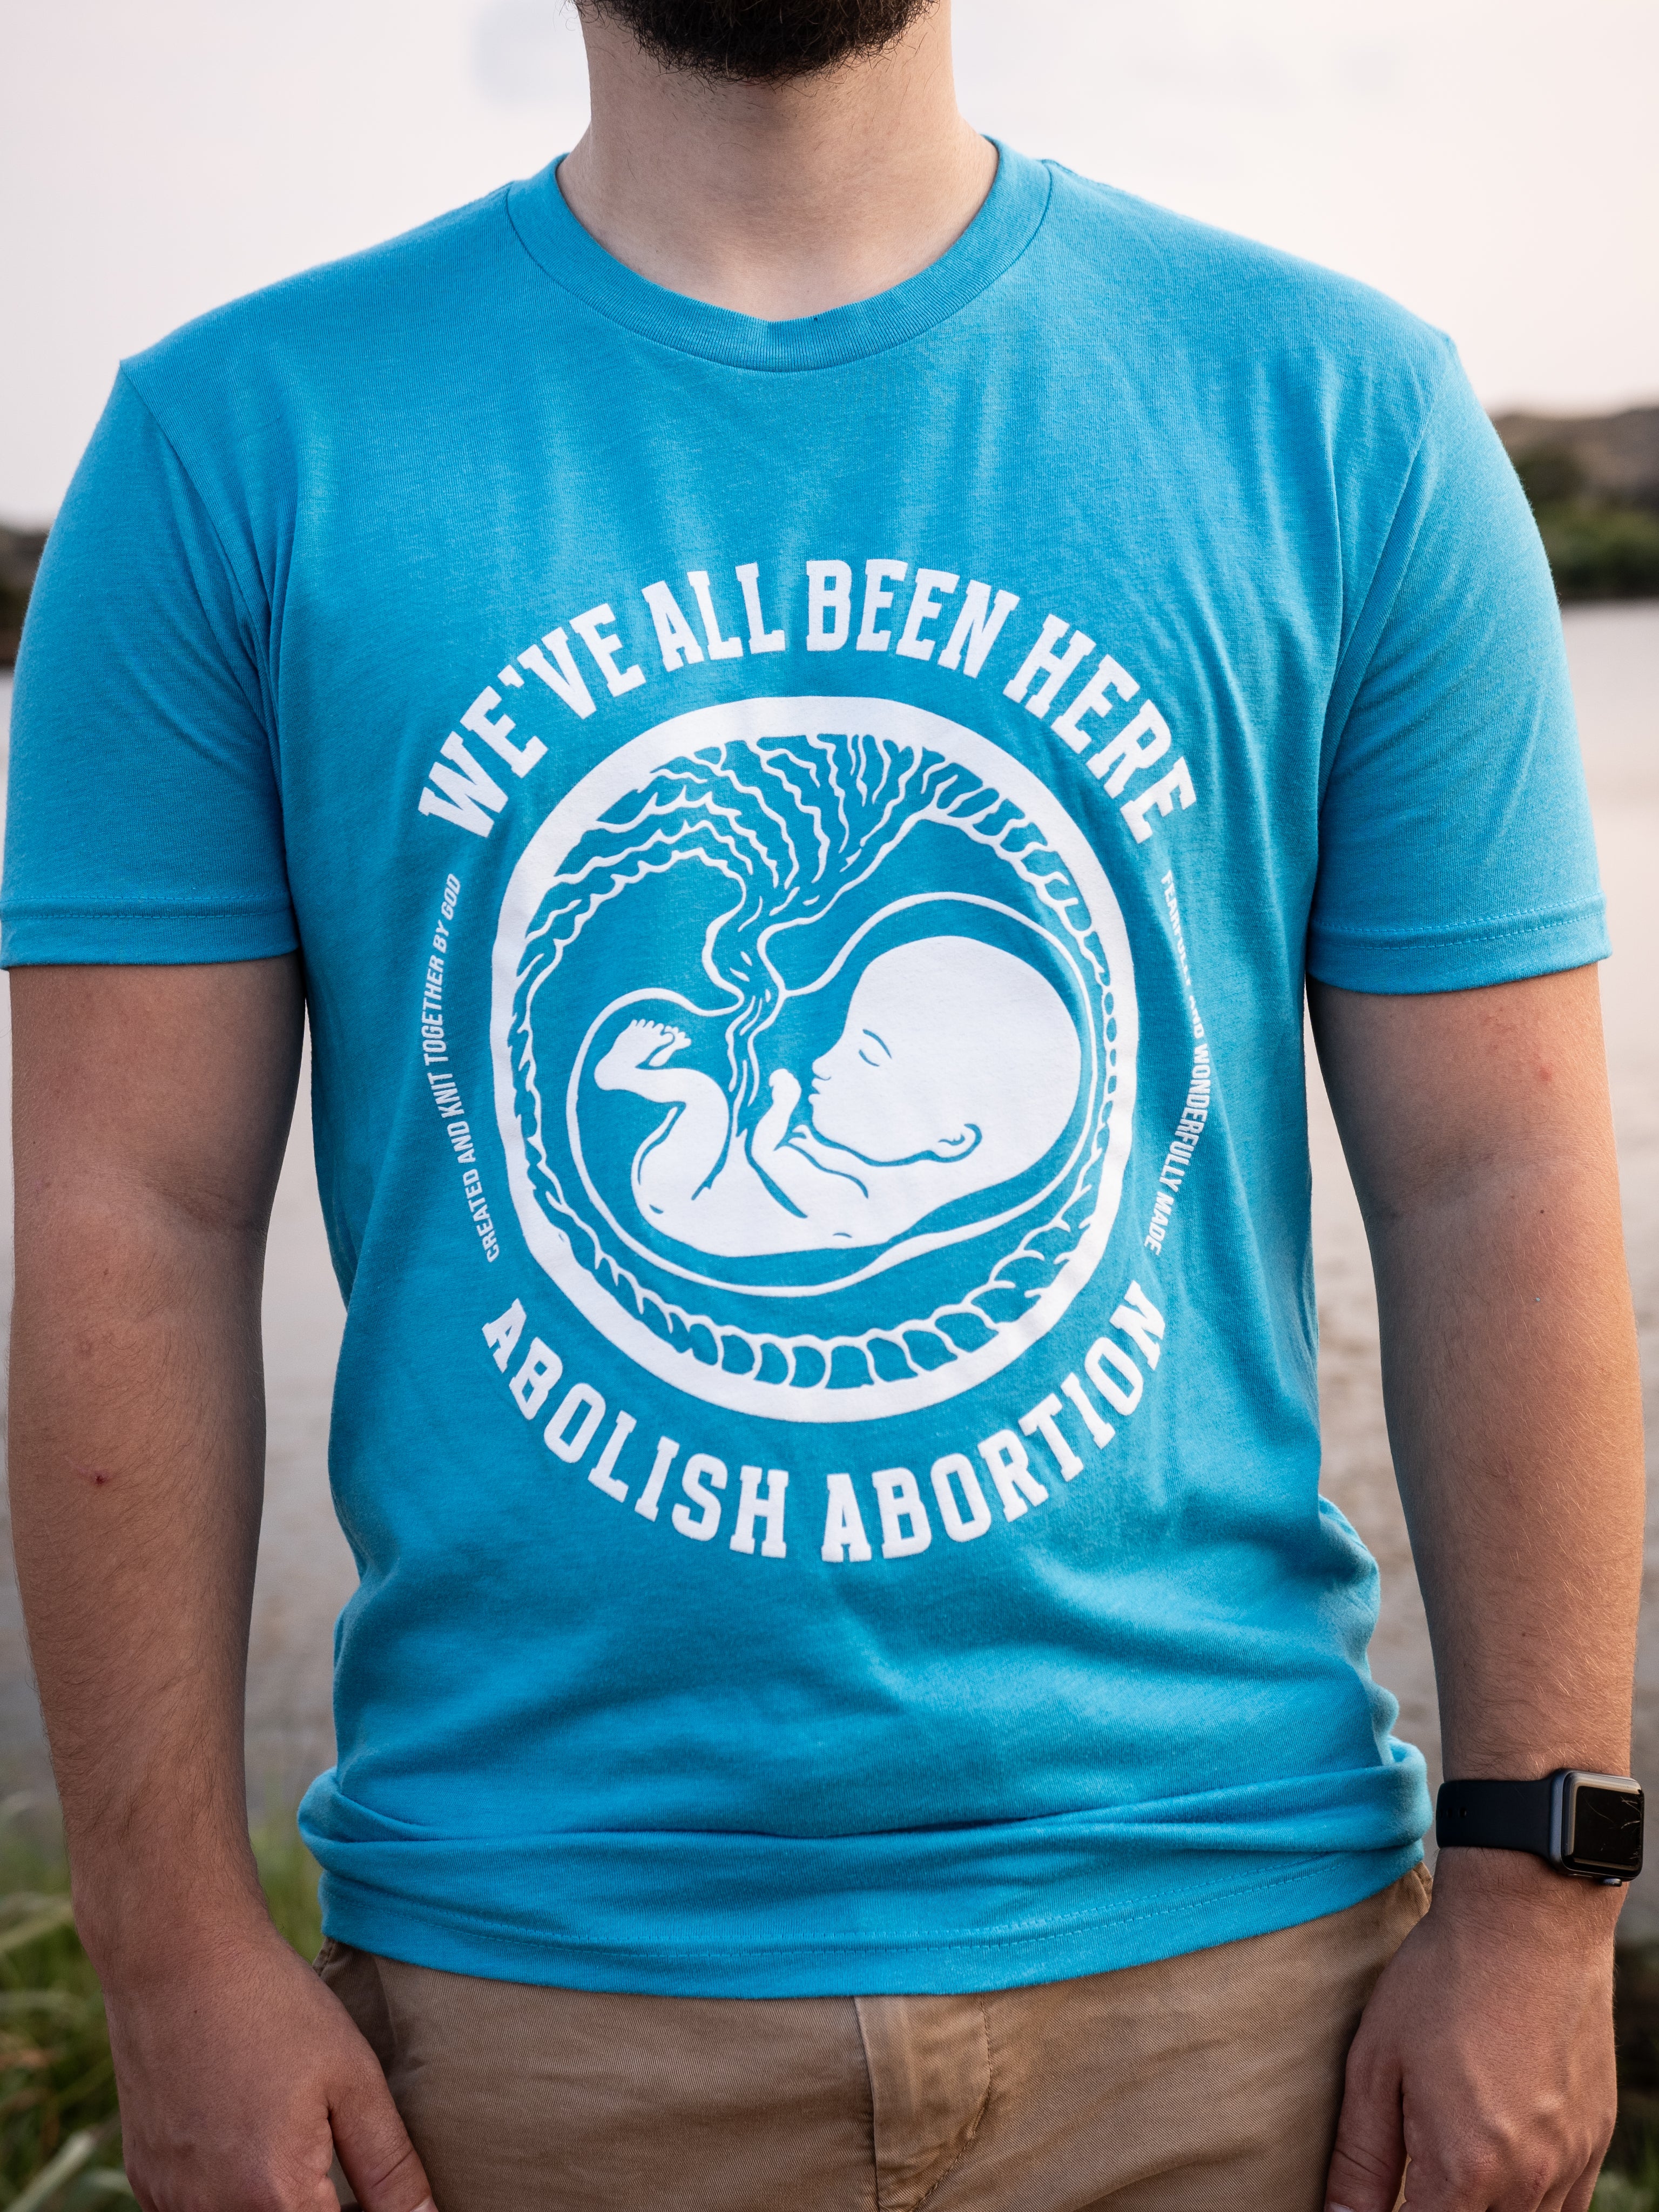 We've All Been Here T-Shirt (Unisex) - Turquoise & Dropcard Bundle